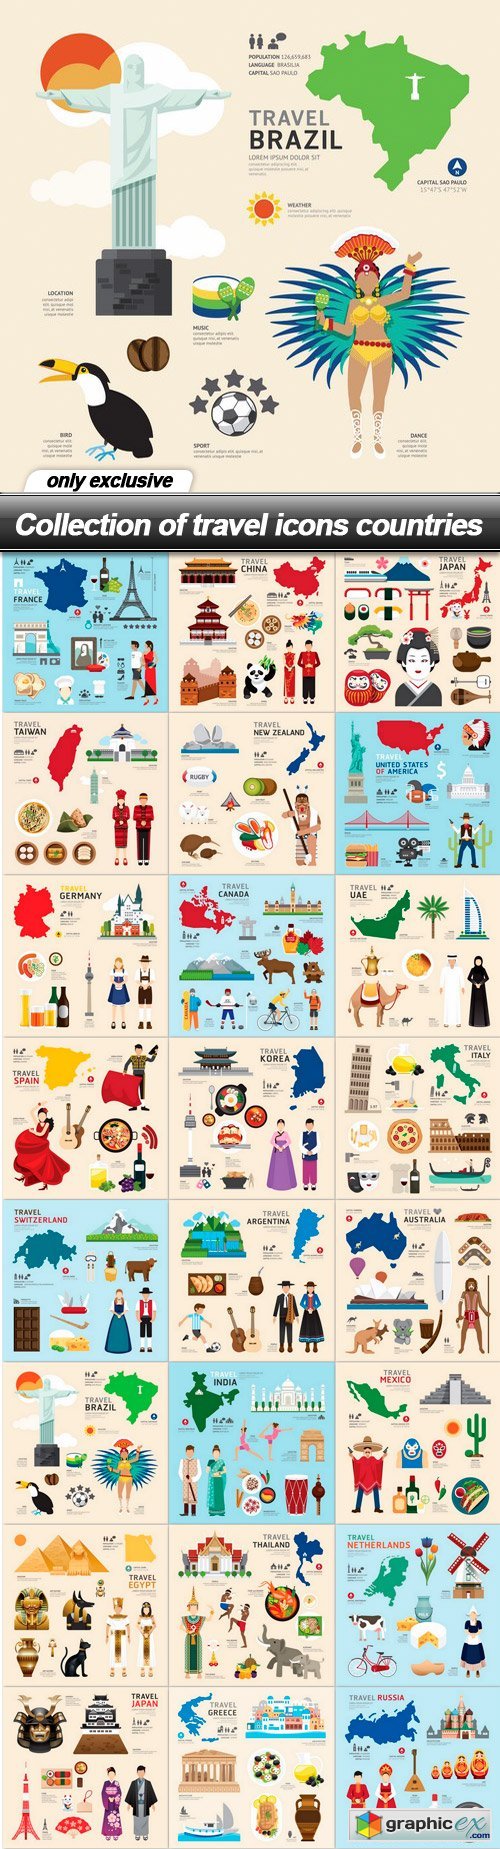 Collection of travel icons countries - 24 EPS